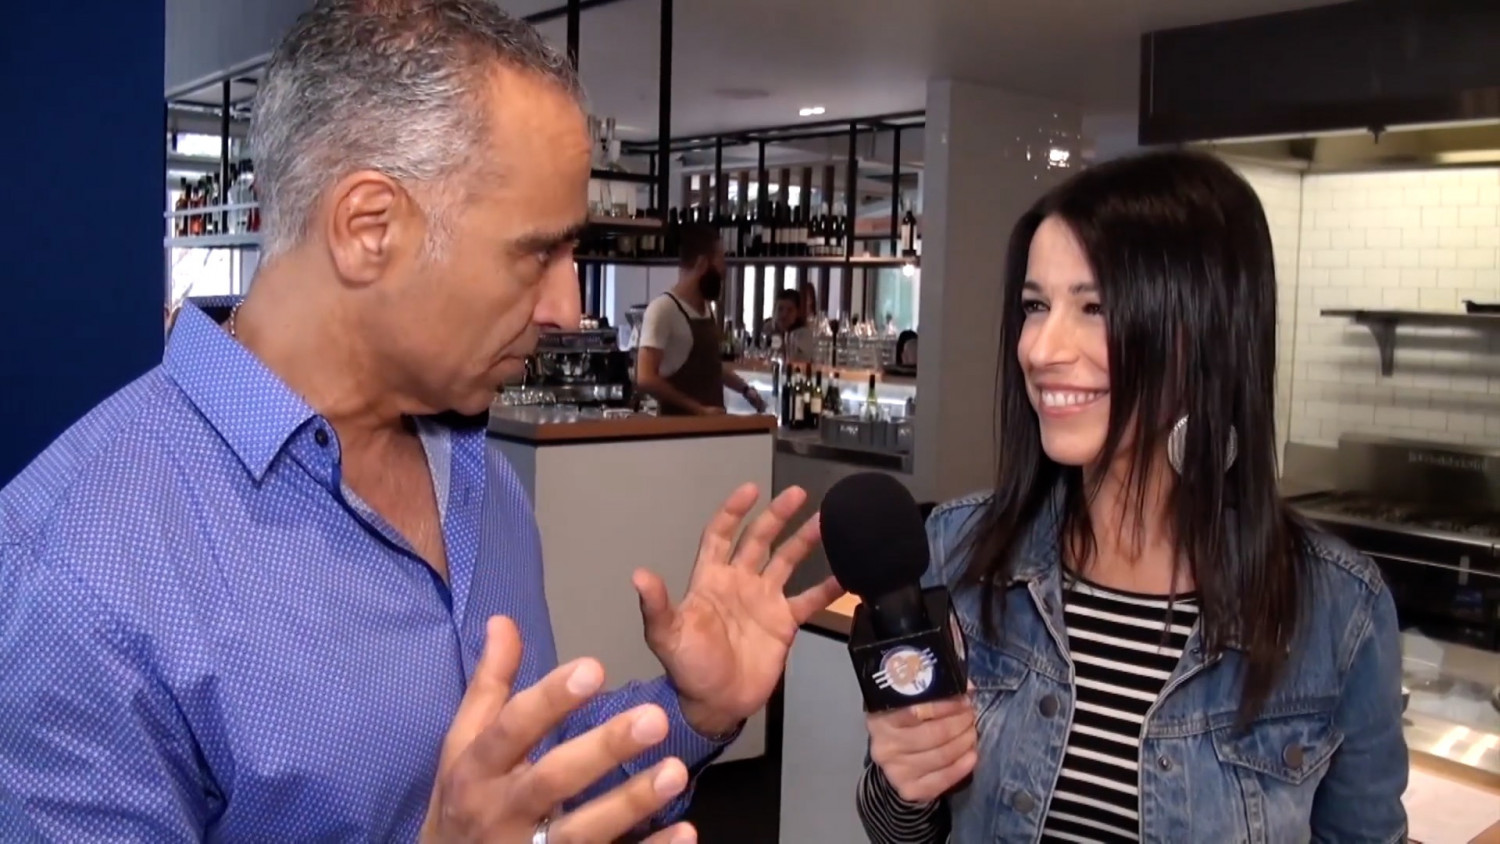 Tina Sofos interviews a shop owner for her food channel on GRTV Australia. (GRTV Australia/Youtube)